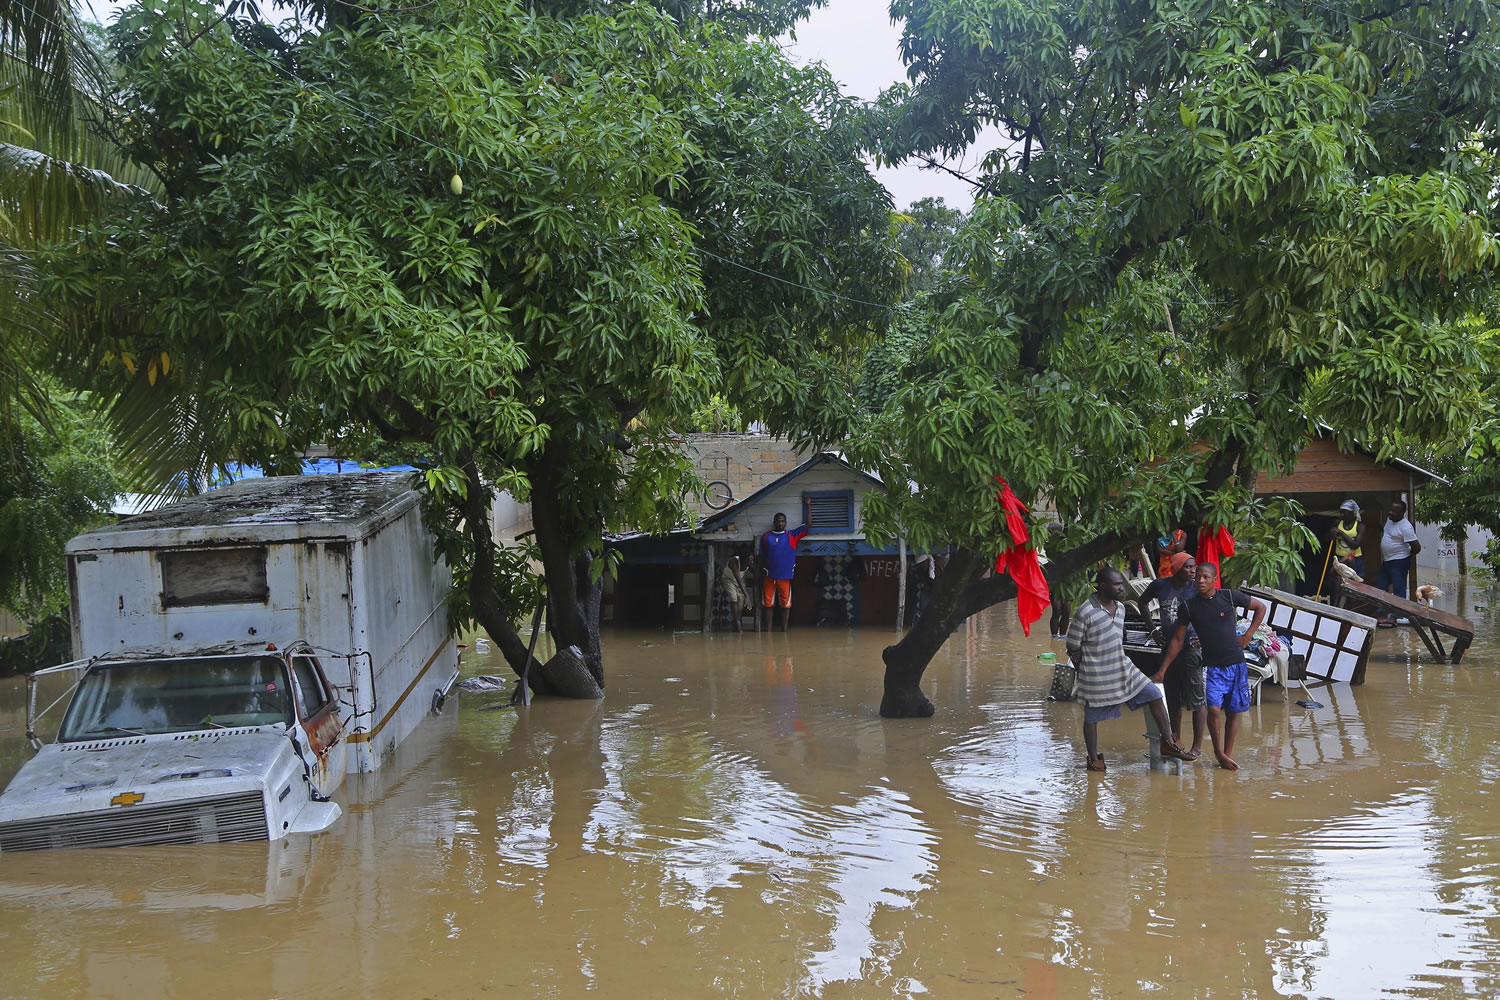 Residents of Leogane, Haiti find higher ground as the water level continues to rise Friday.